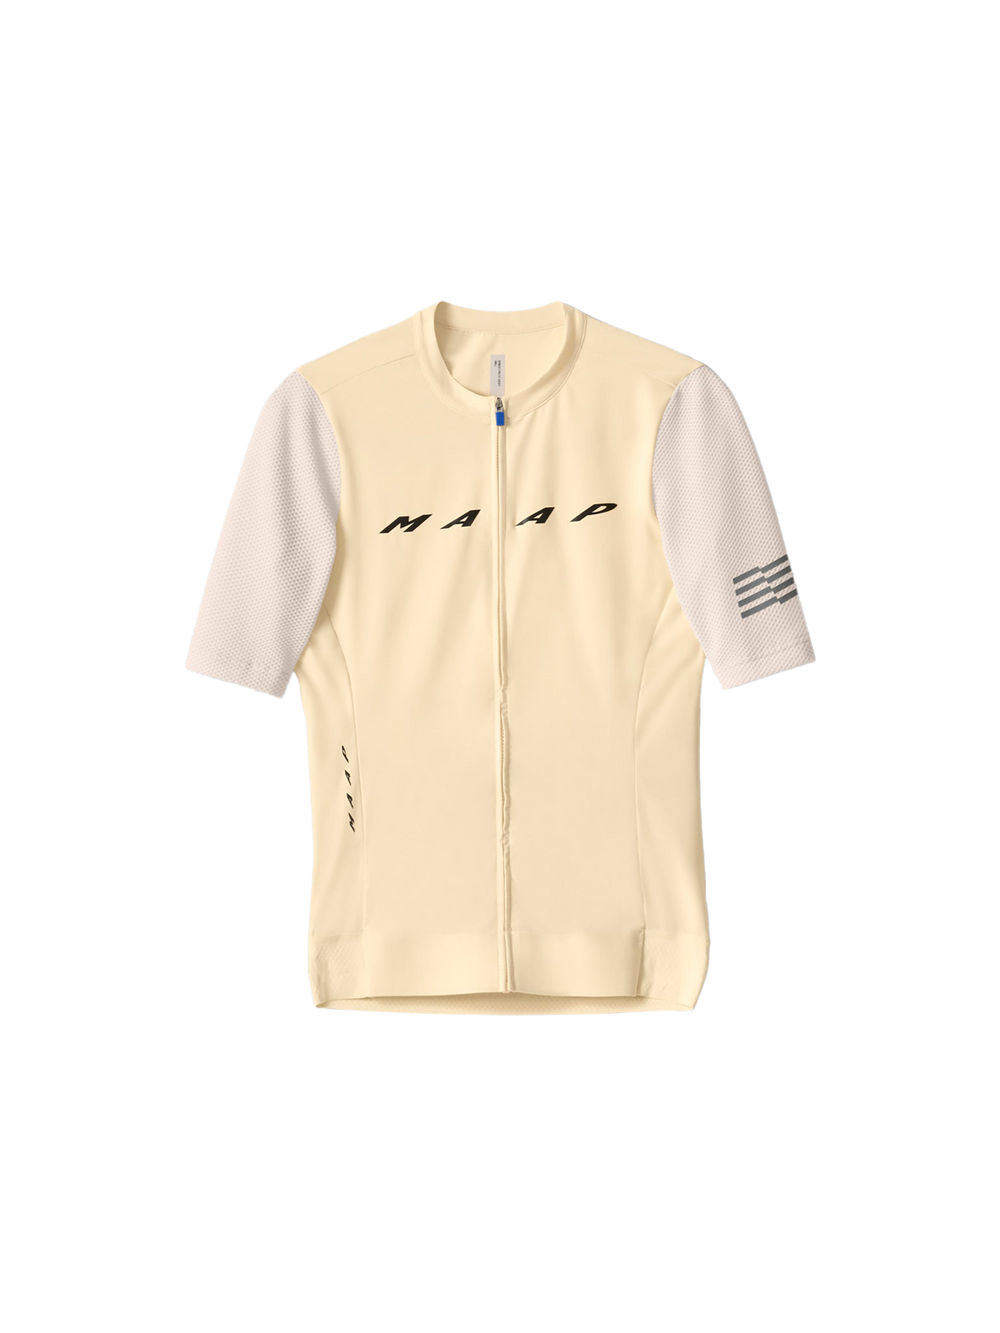 Product Image for Women's Evade Pro Base Jersey 2.0